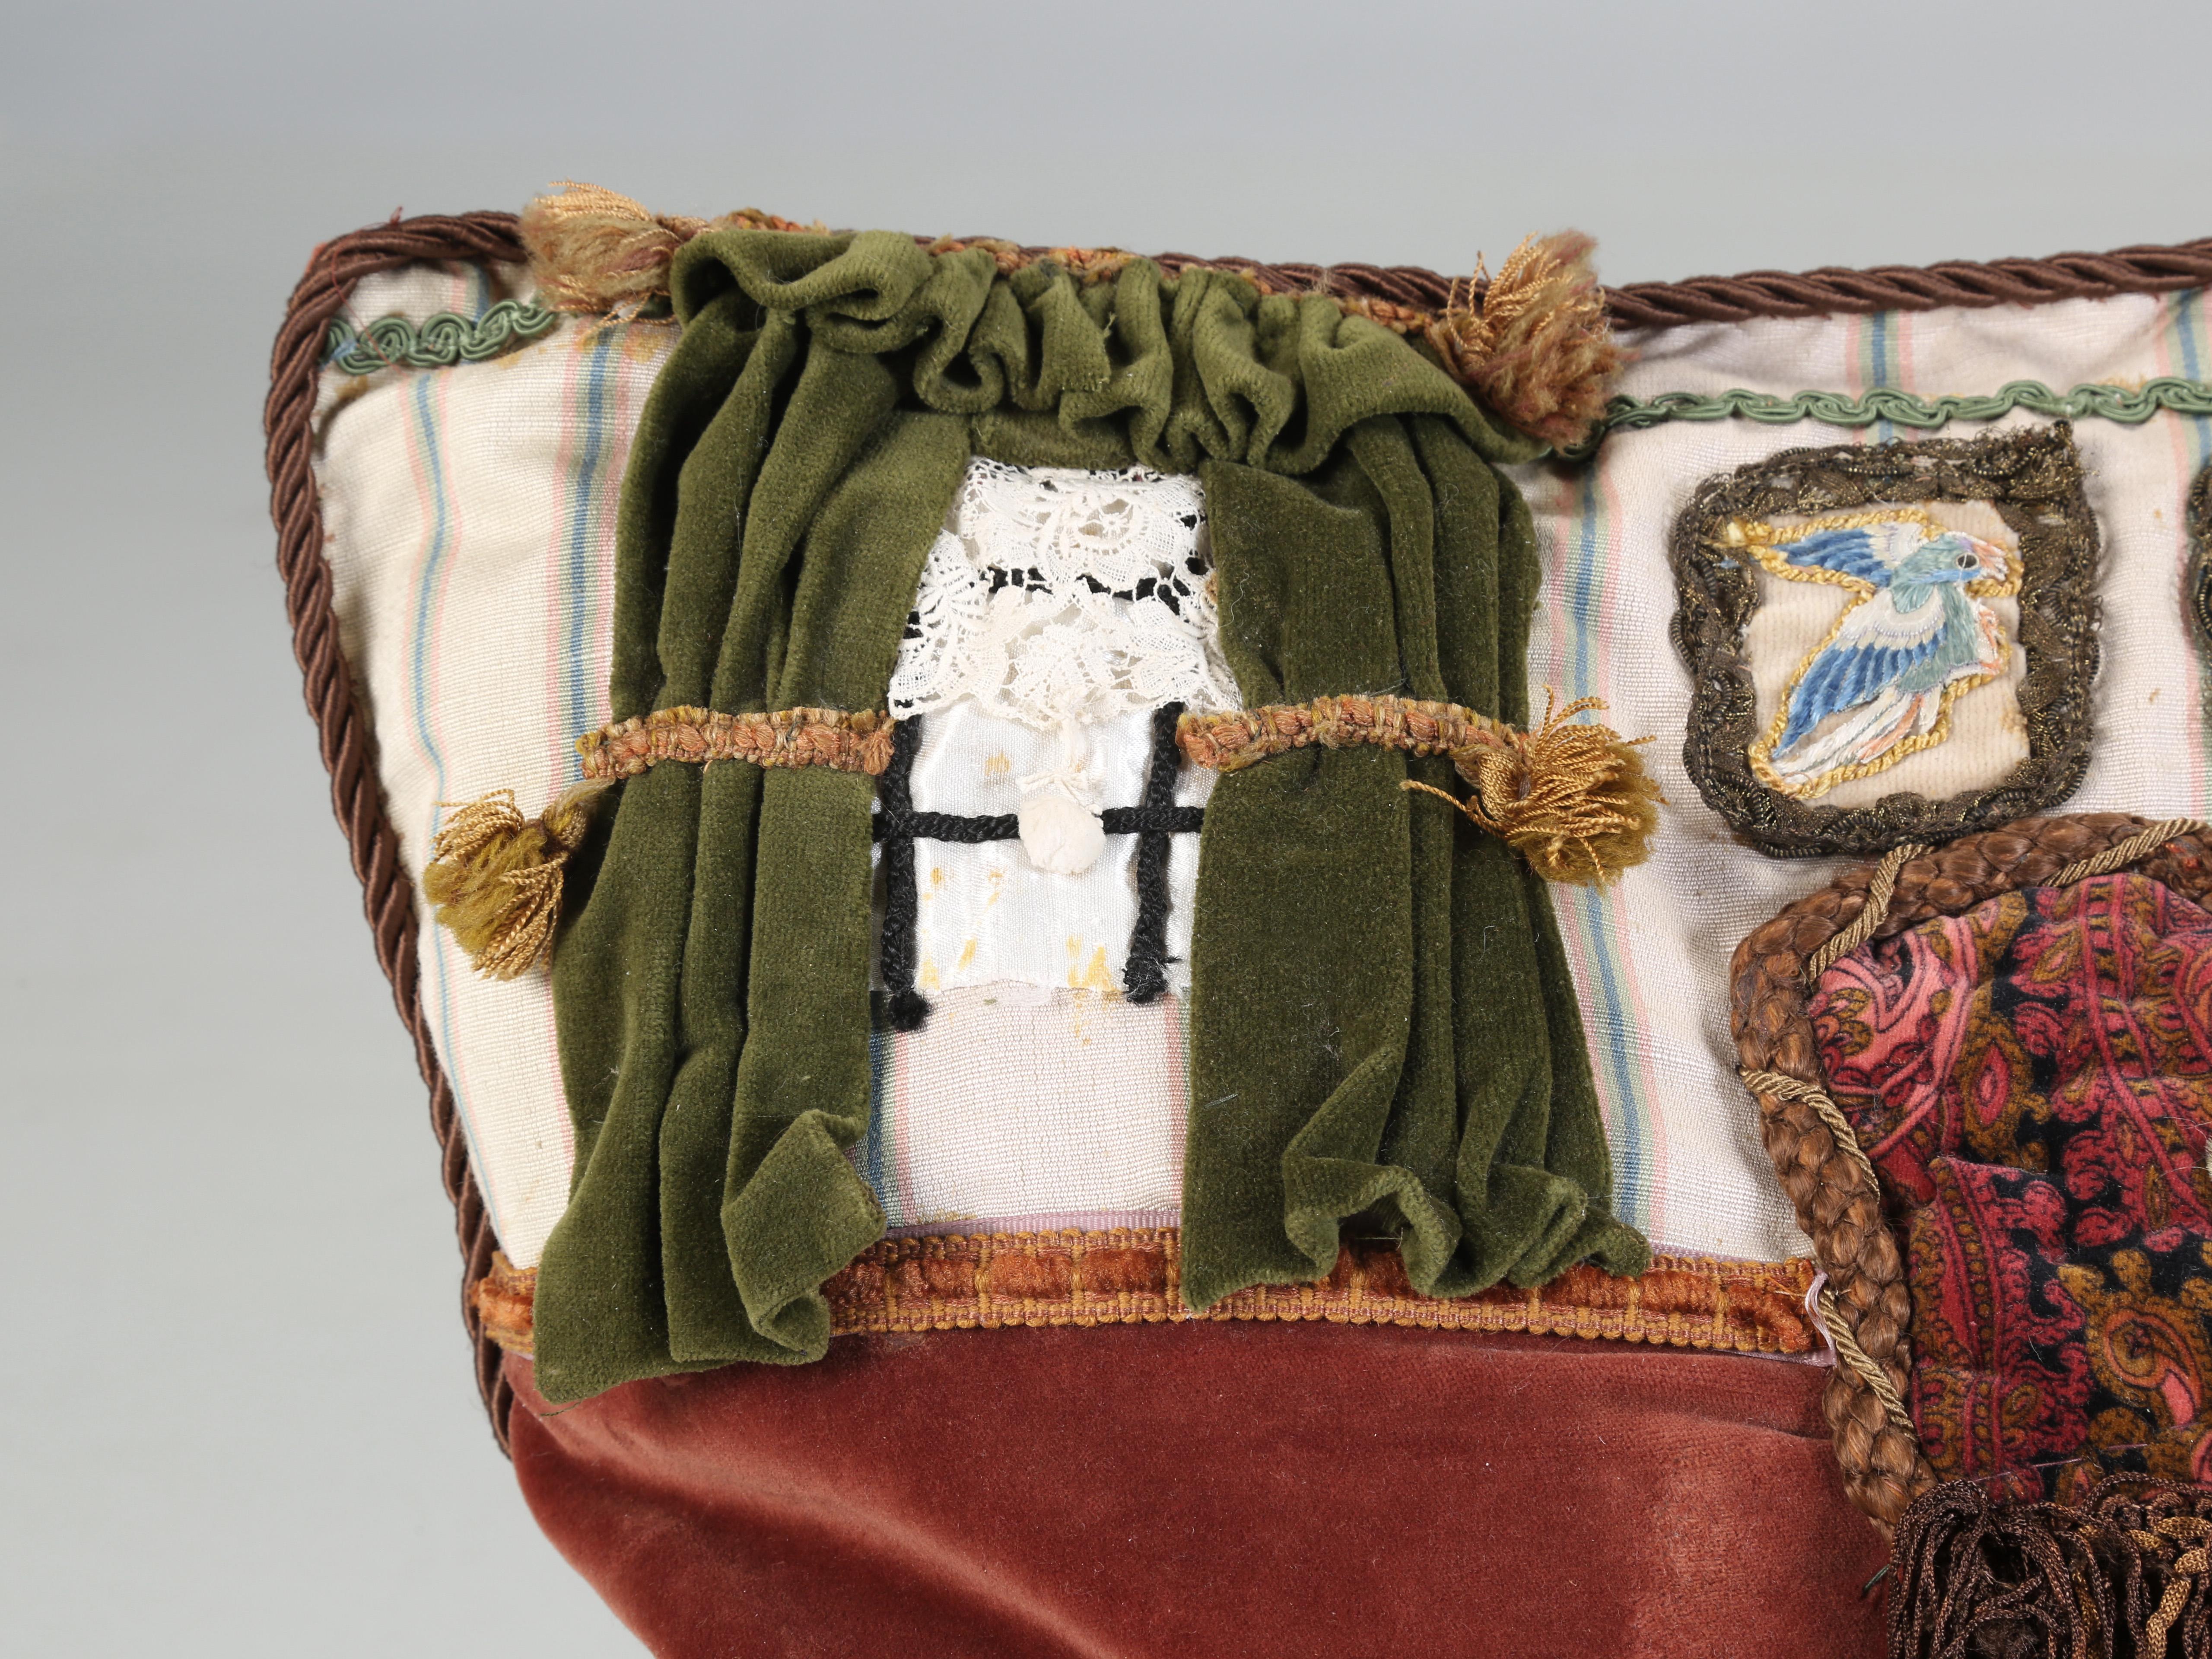 In the north of England there was an elderly woman who made the most beautiful Folk-Art Pillows and each time we went shopping for Antiques in England, we would see this woman with an amazing collection of Pillows. Not sure how many she actually